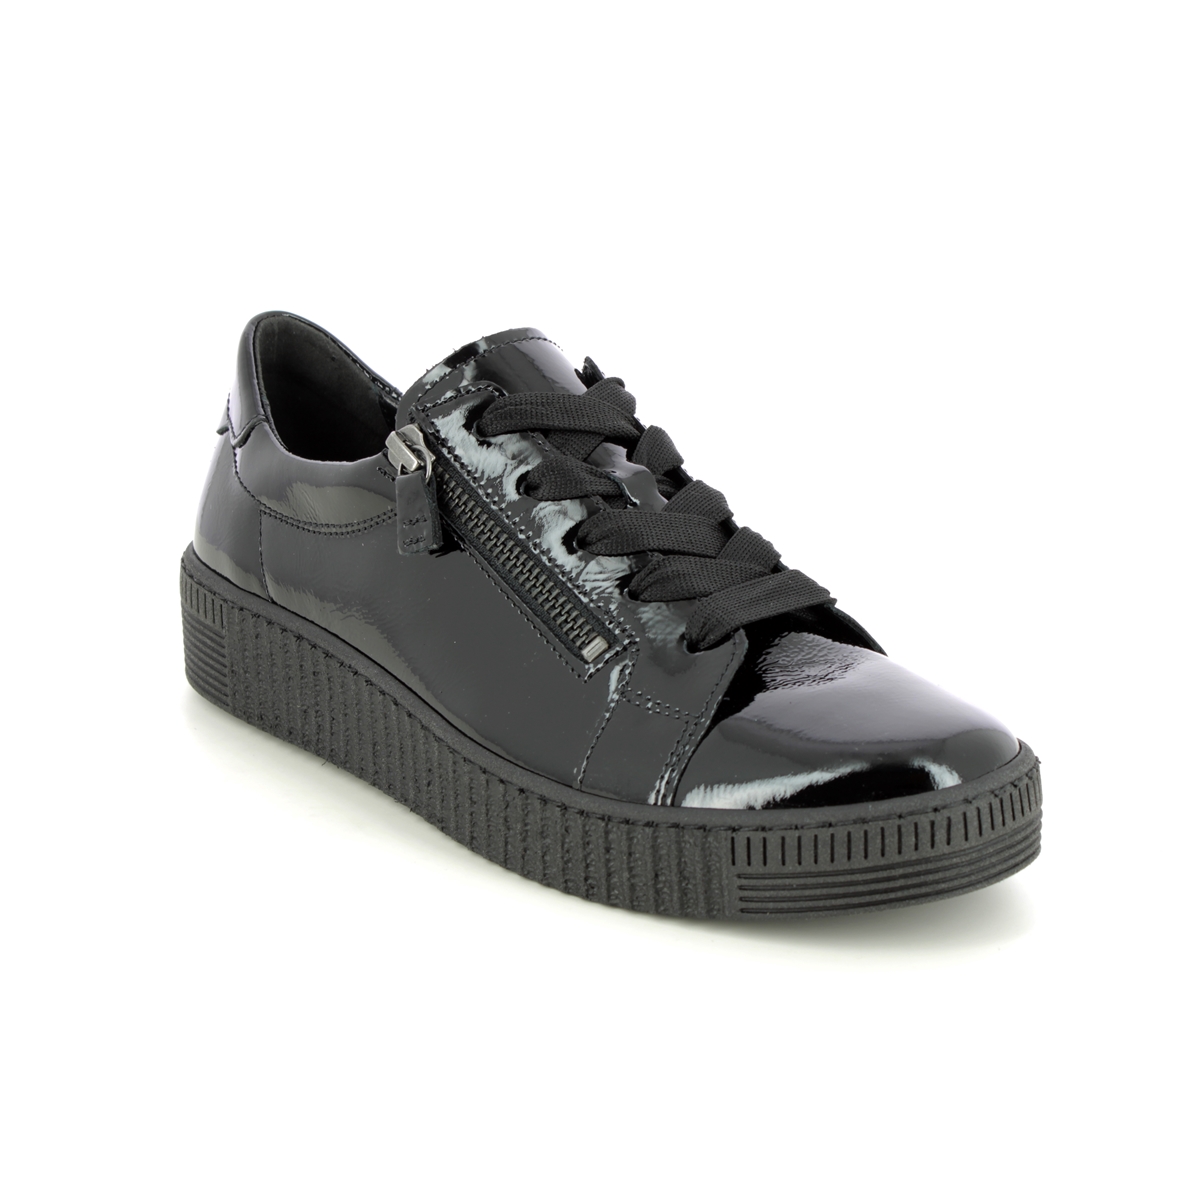 Gabor Wisdom Black Patent Womens Trainers 93.334.97 In Size 4.5 In Plain Black Patent  Womens Trainers In Soft Black Patent Leather